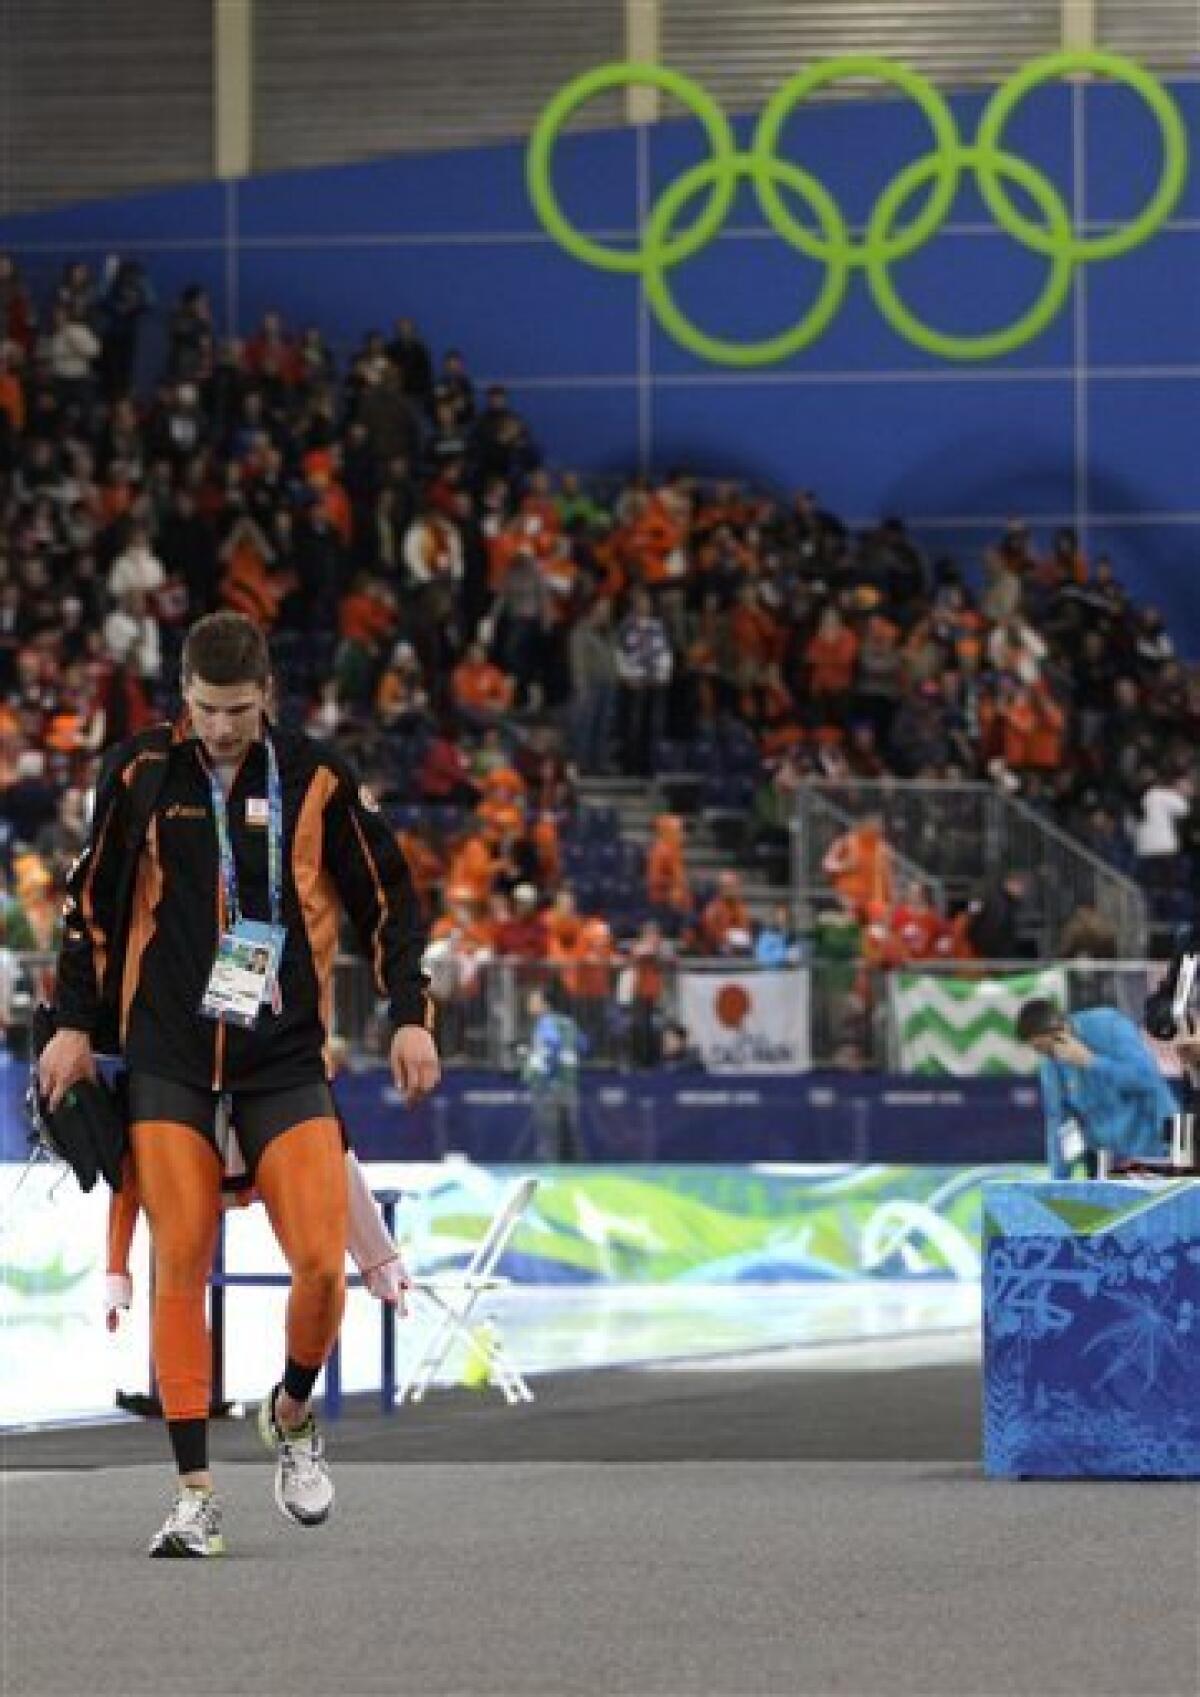 Netherlands's Sven Kramer, walks away after he was disqualified during the men's 10,000 meter speed skating race at the Richmond Olympic Oval at the Vancouver 2010 Olympics in Vancouver, British Columbia, Tuesday, Feb. 23, 2010. Lee Seung-hoon of South Korea won a stunning gold medal in men's 10,000-meter speedskating Tuesday when overwhelming favorite Sven Kramer made an amateurish mistake, failing to switch lanes just past the midway point of the race, and was disqualified. (AP Photo/Matt Dunham)